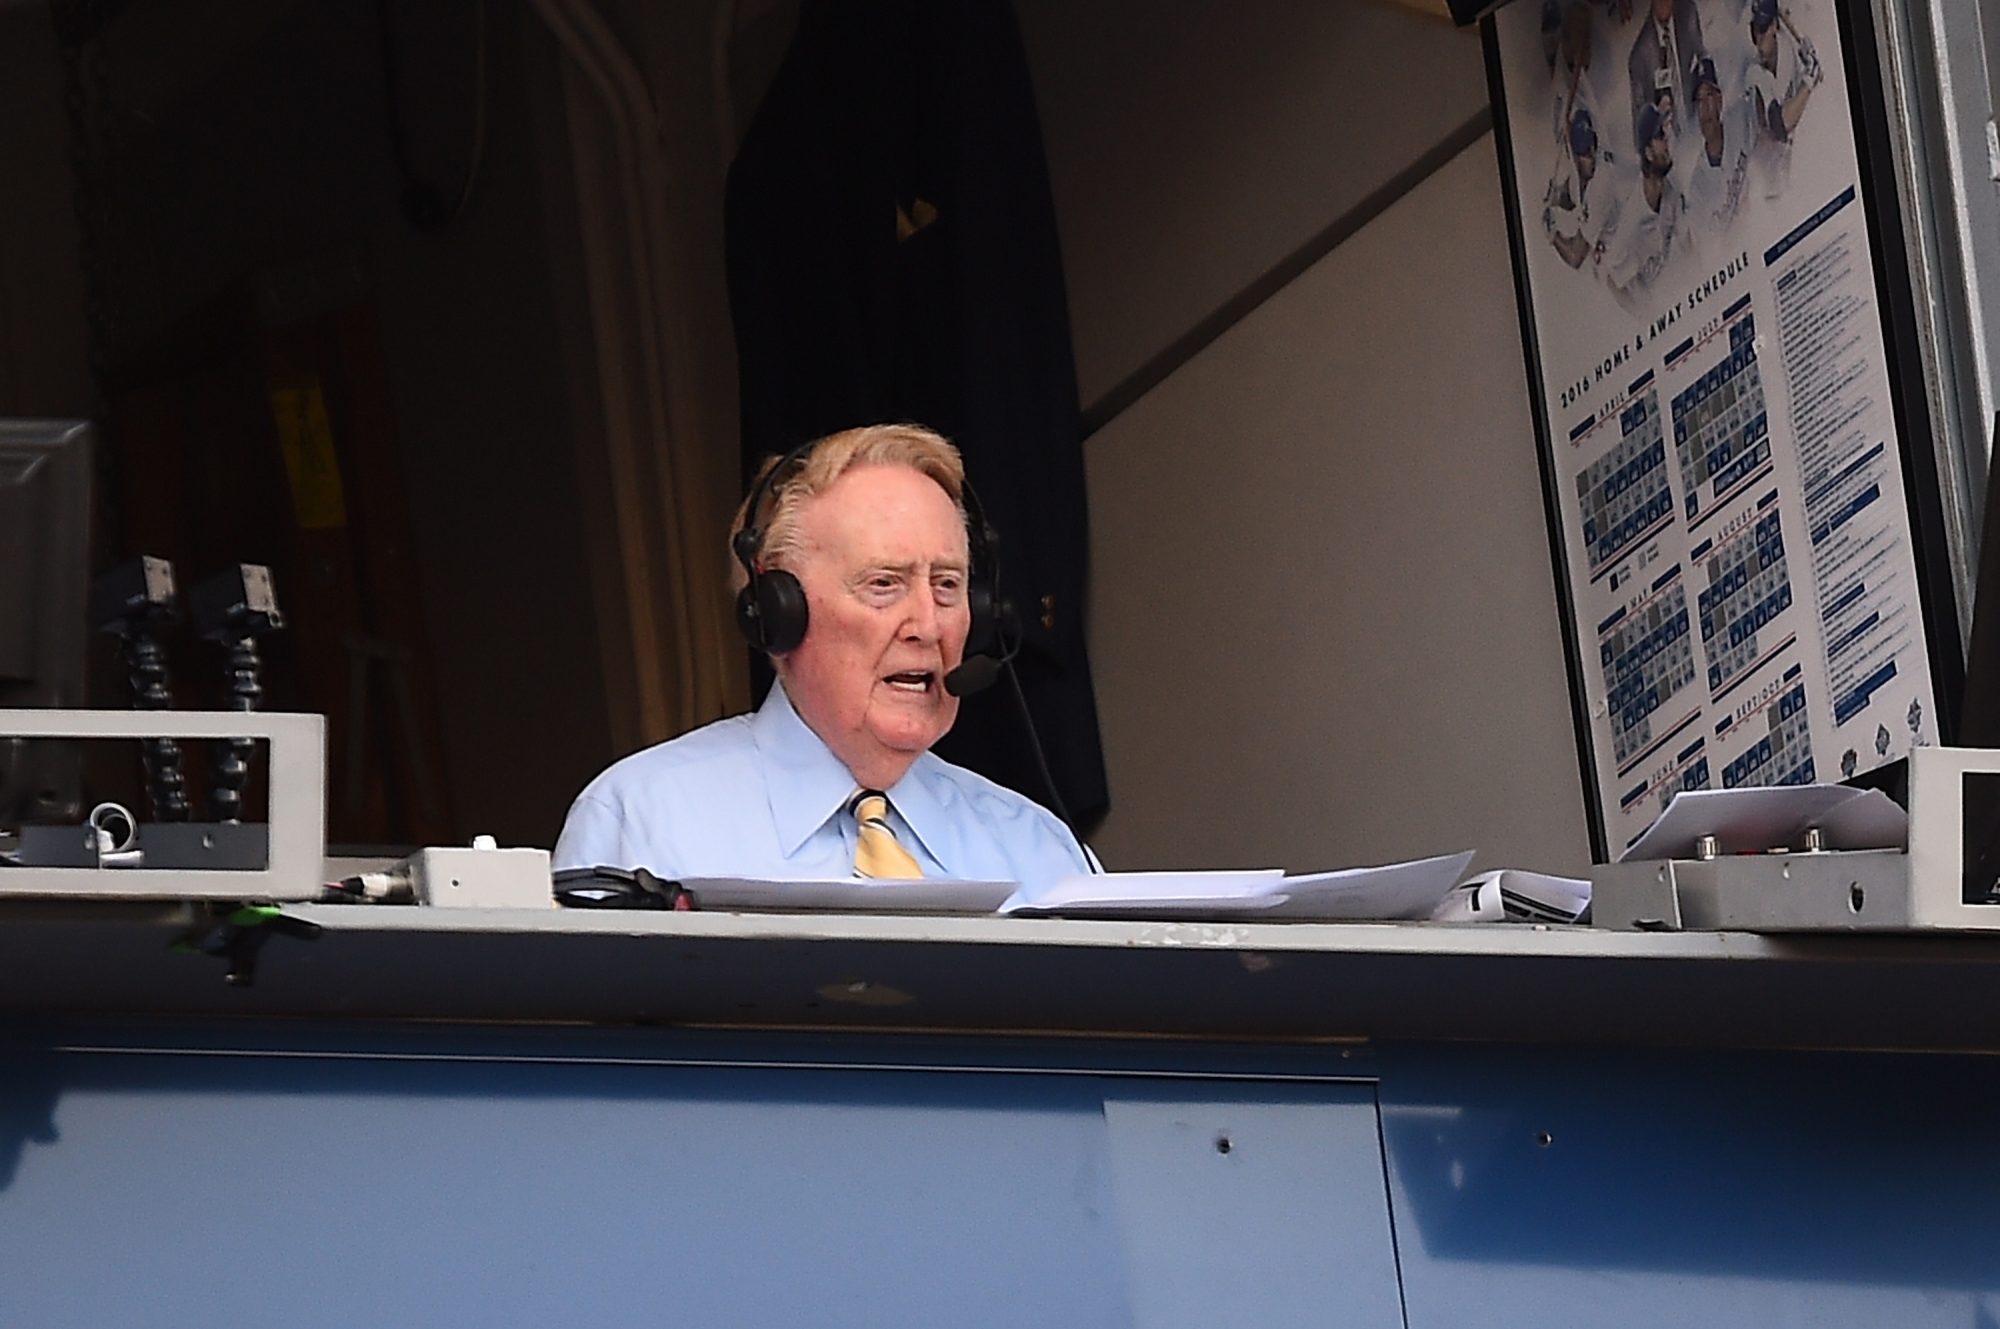 Vin Scully announces a game